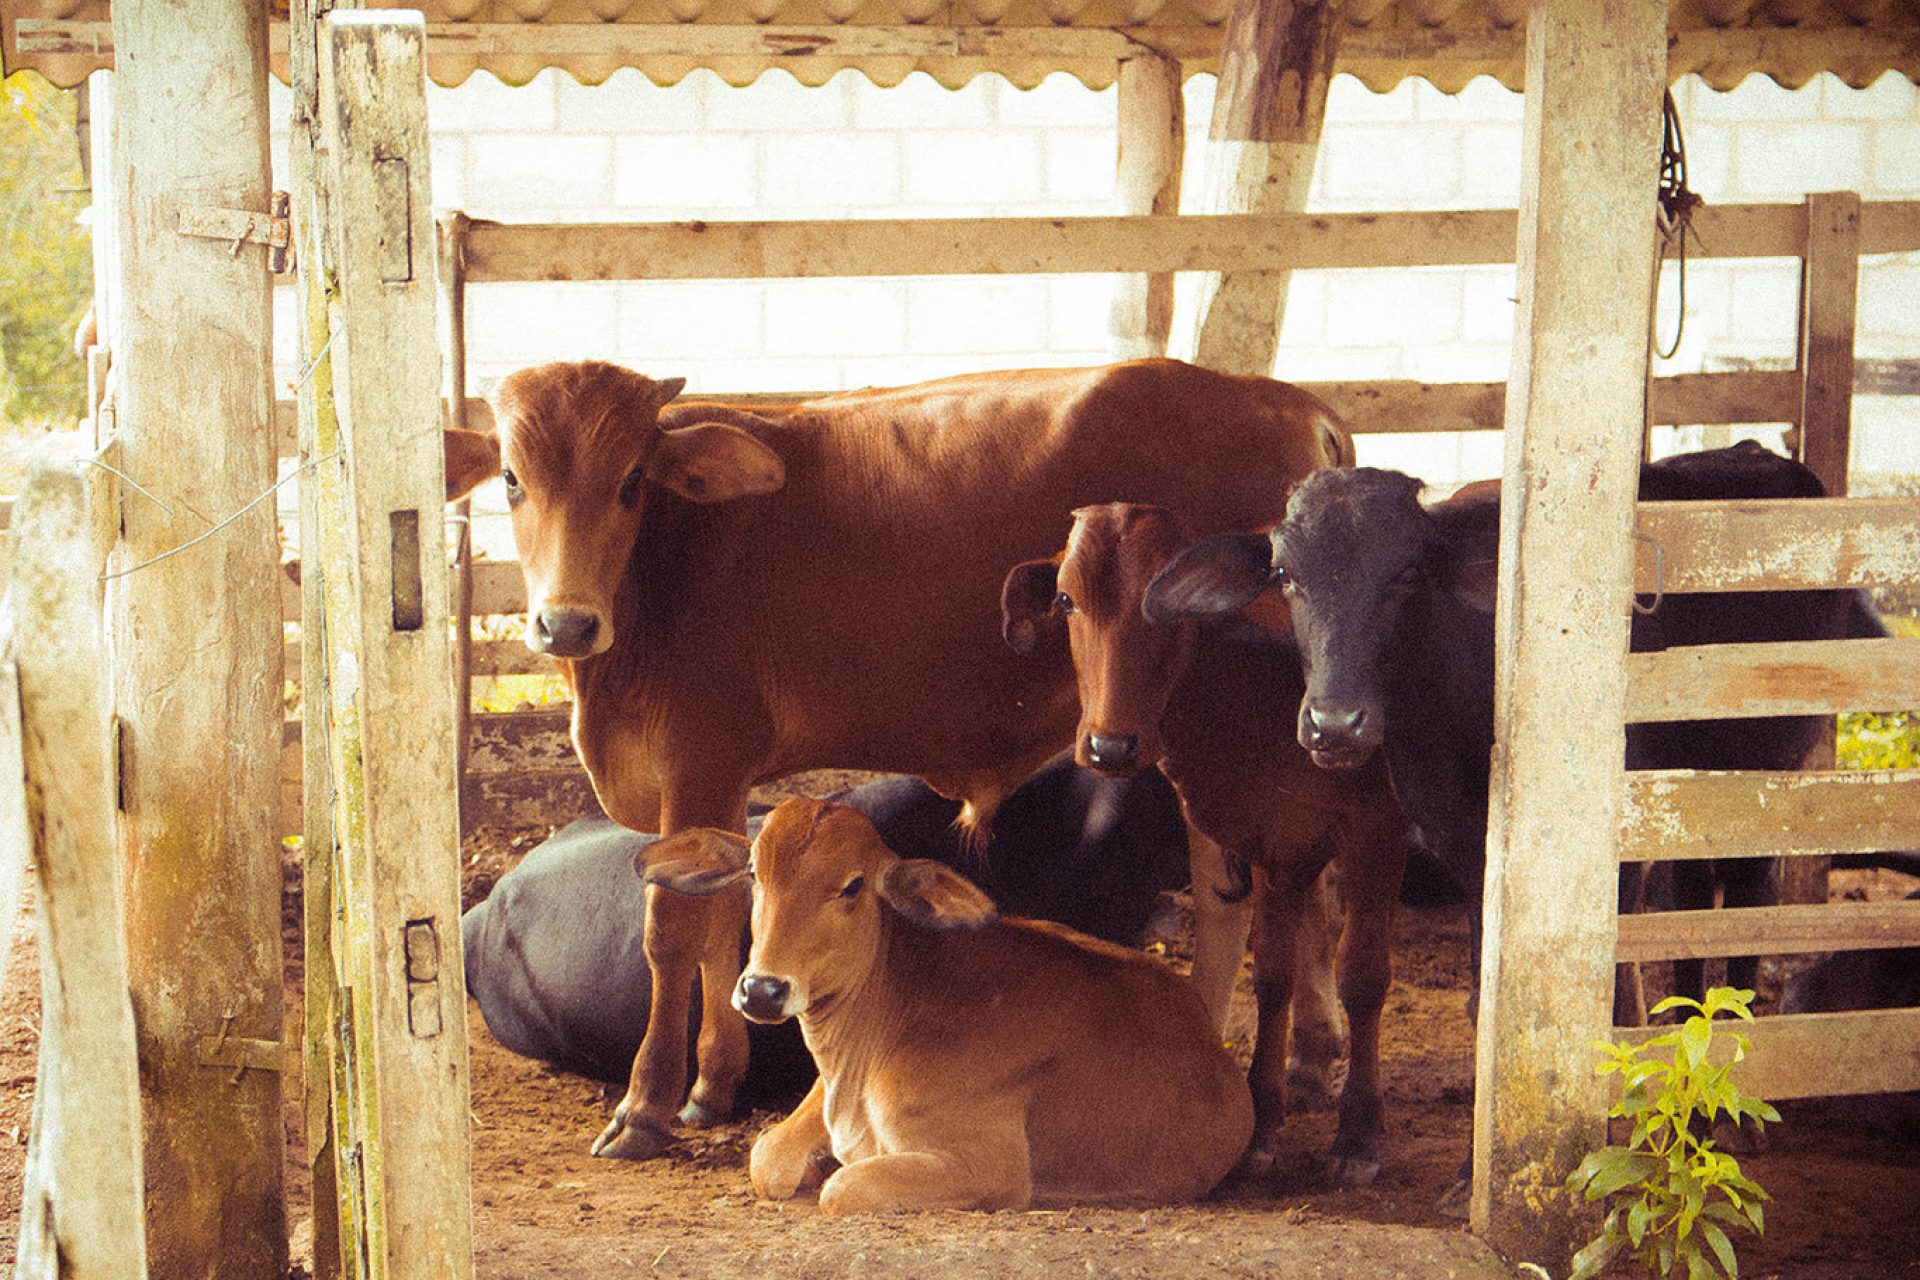 Group of cattle relaxing in wood shelter